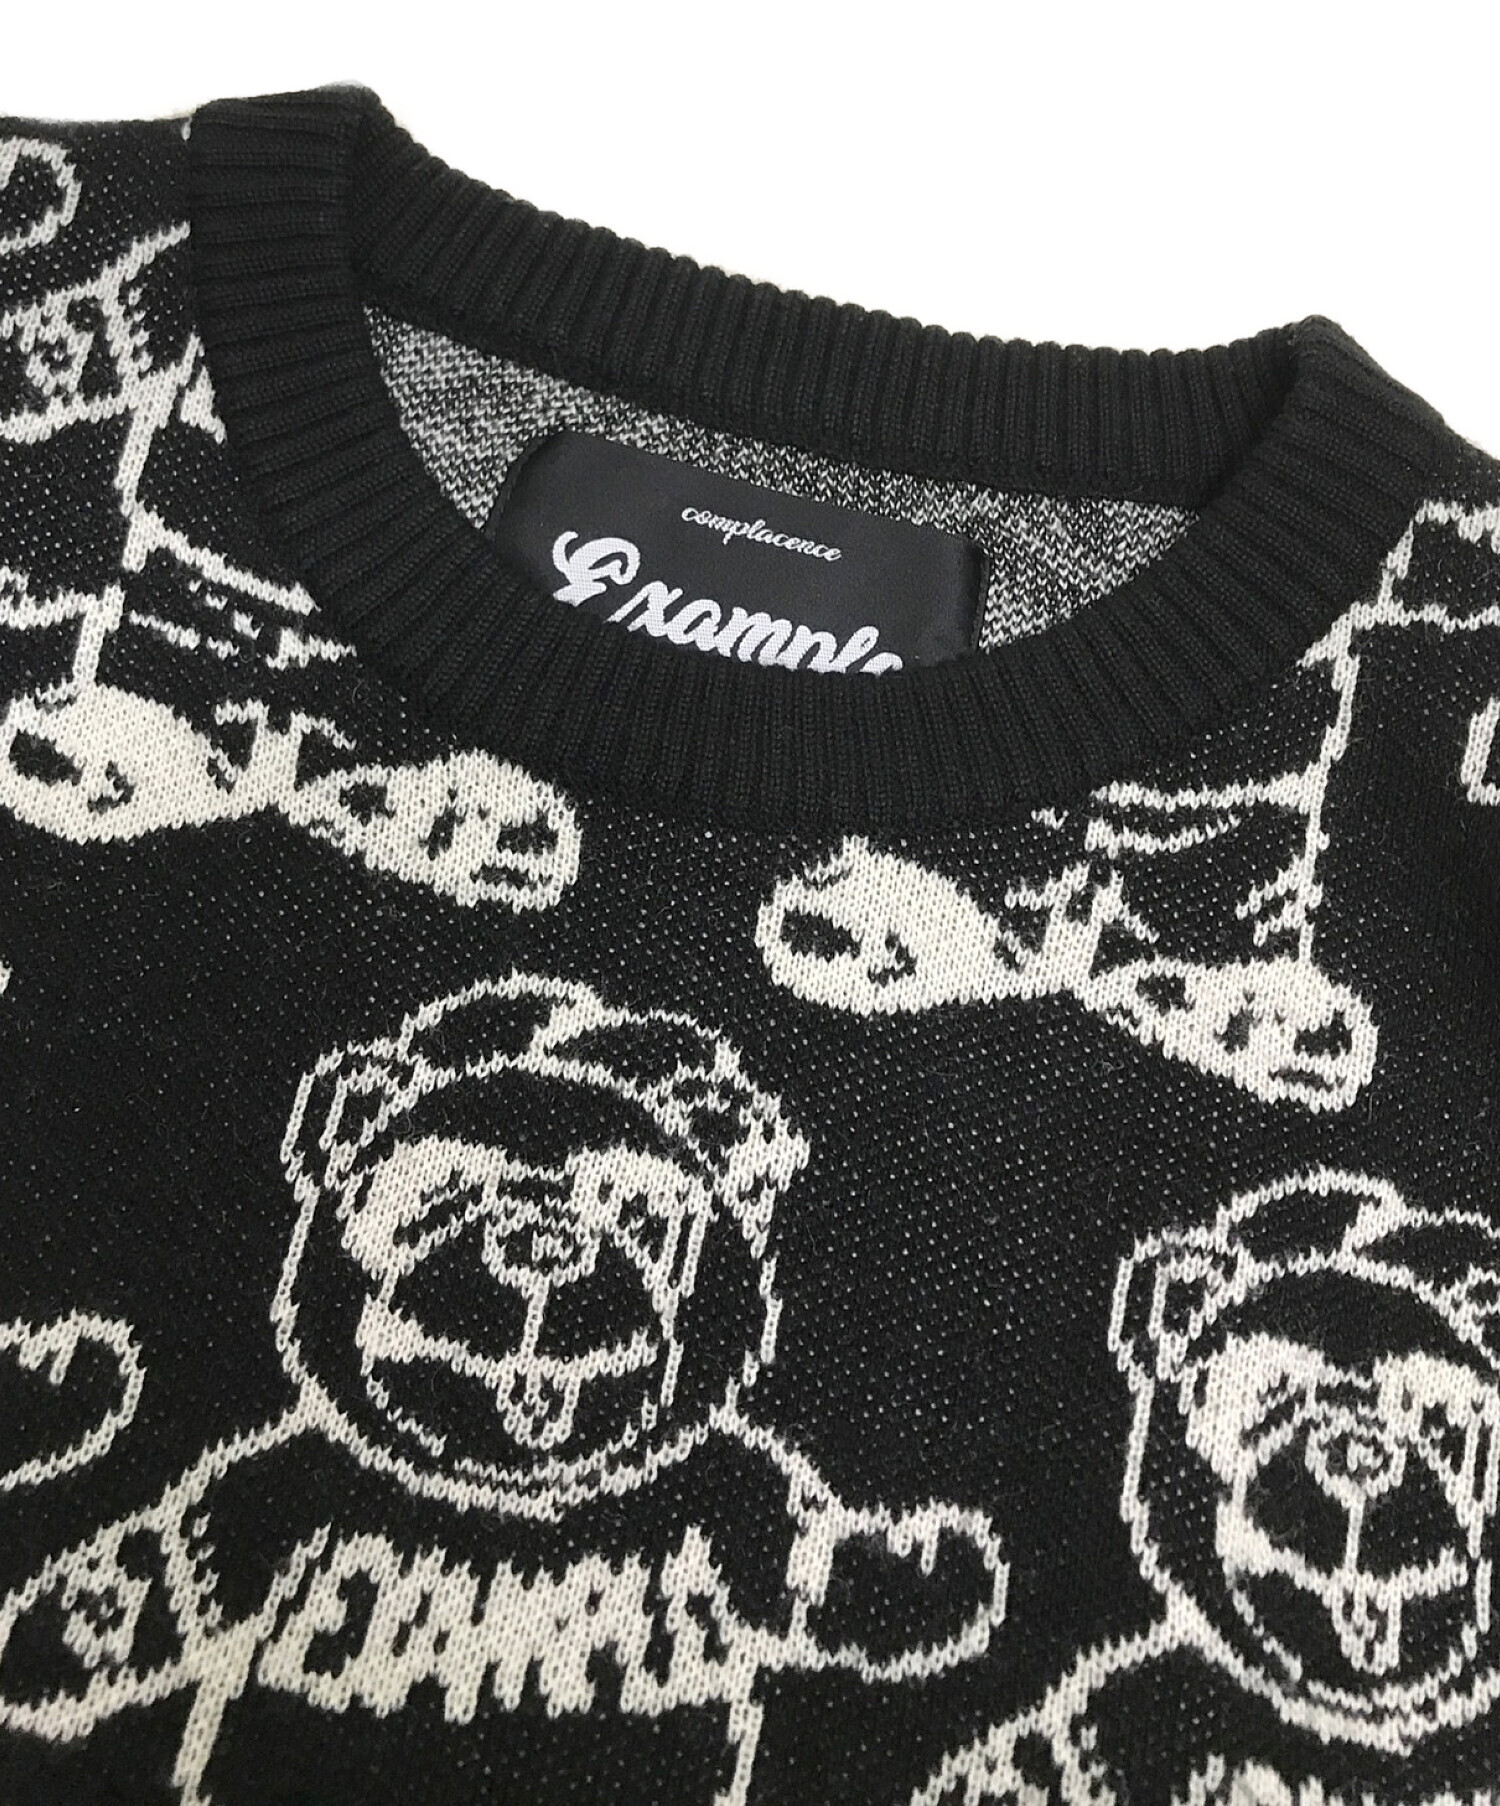 EXAMPLE BB BEAR KNIT SWEATER